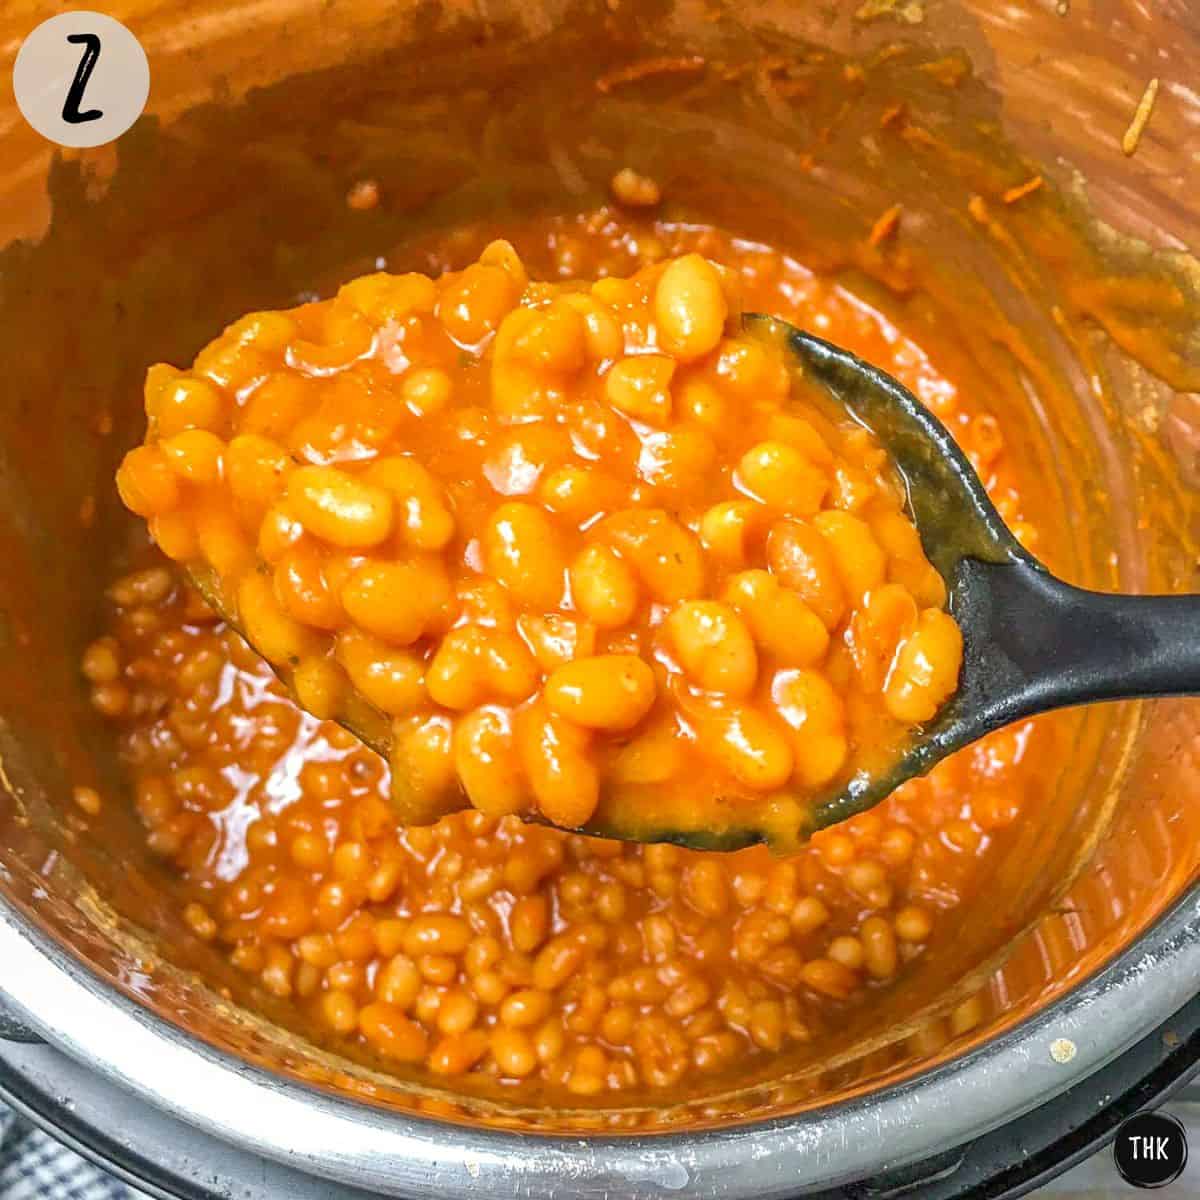 Scoop of cooked baked beans inside Instant Pot.